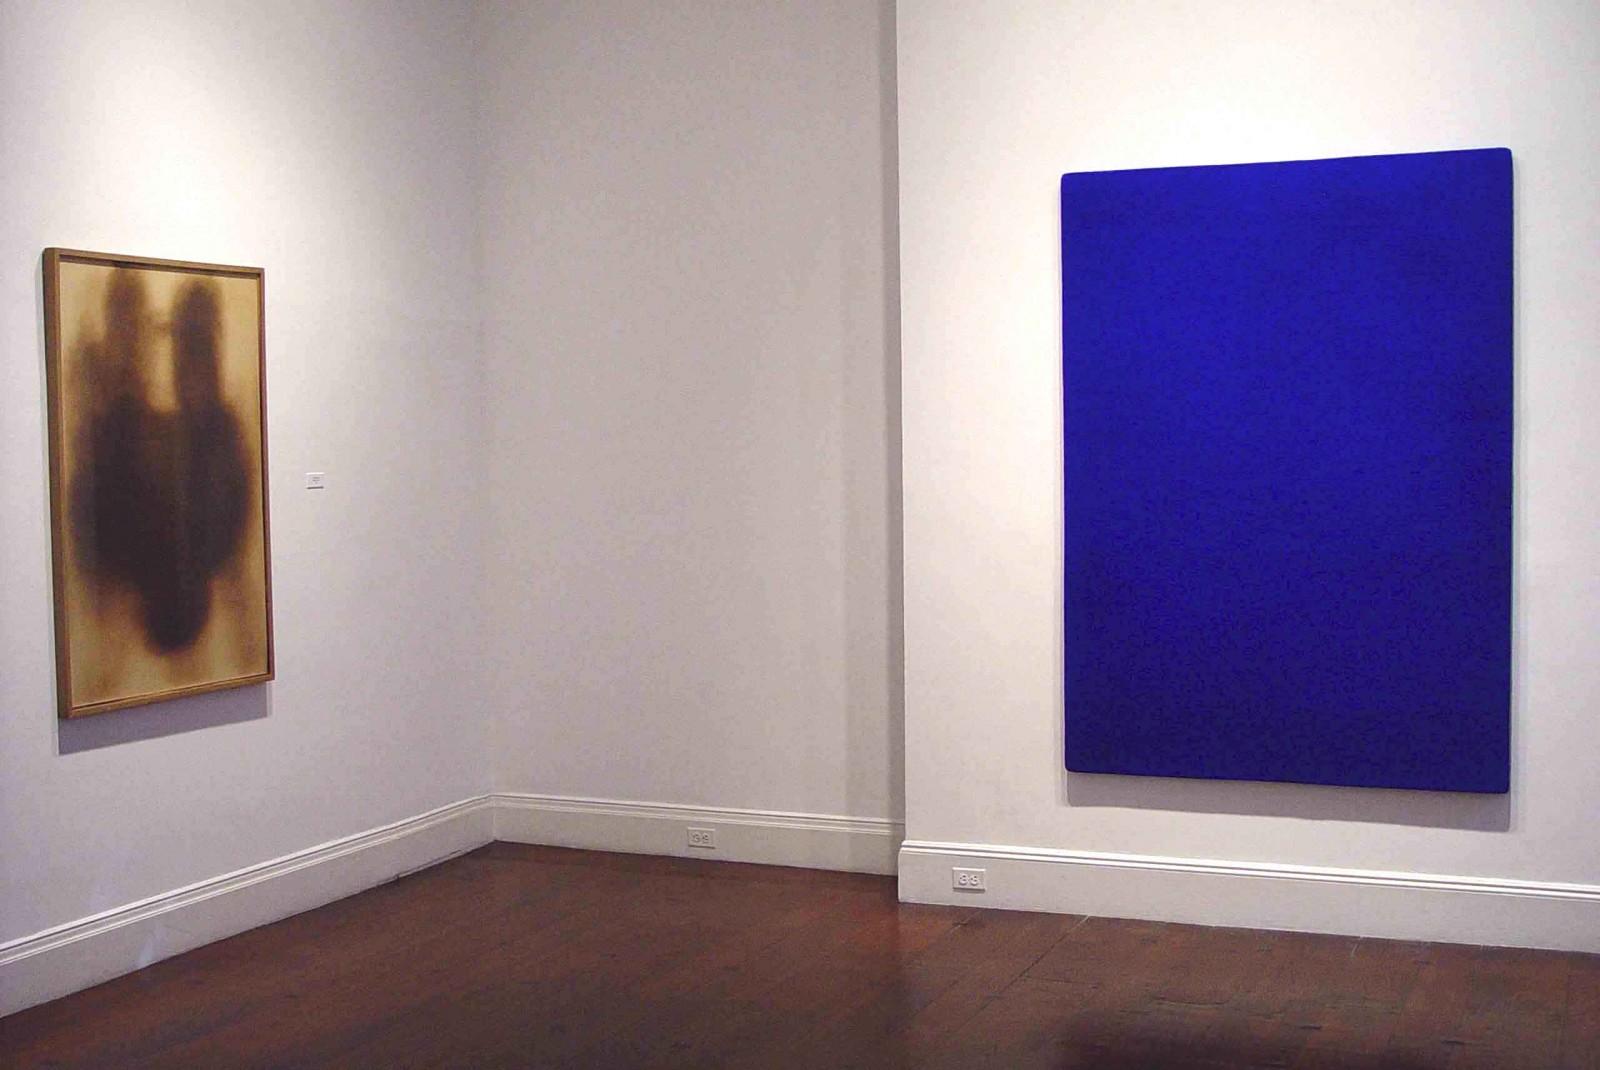 View of the exhibition, "Yves Klein: A Career Survey", L & M Arts, 2005